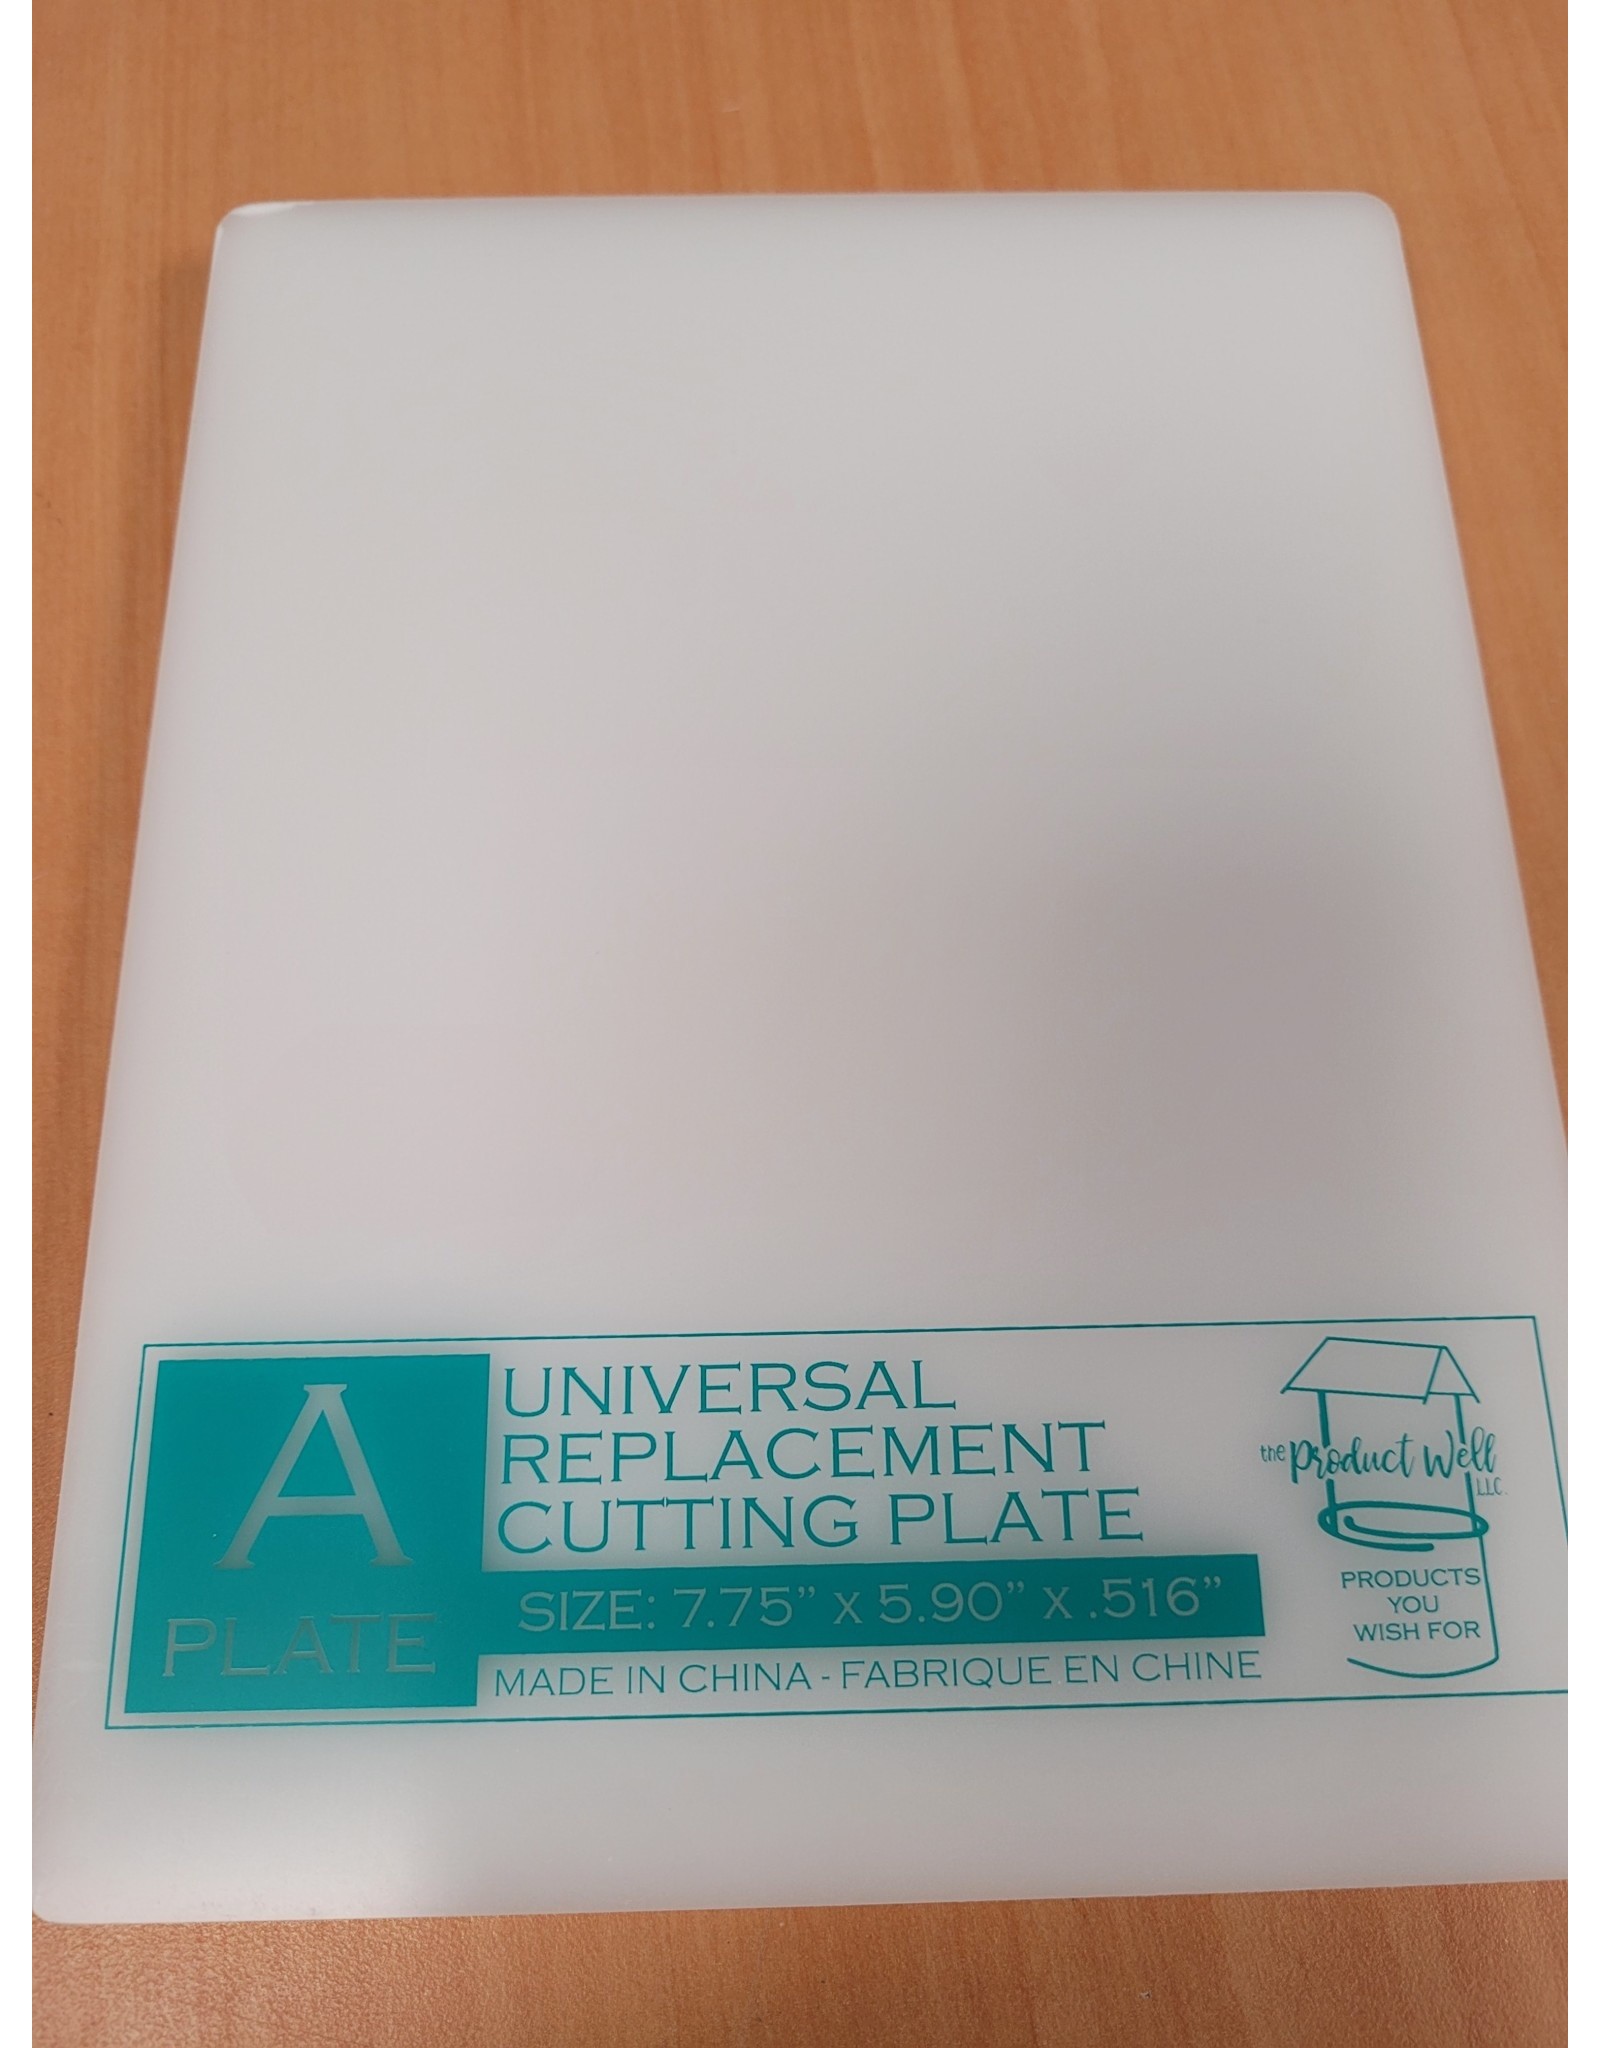 THE PRODUCT WELL Universal Replacement Cutting Plate A 7.75" x 5,90"x .516"